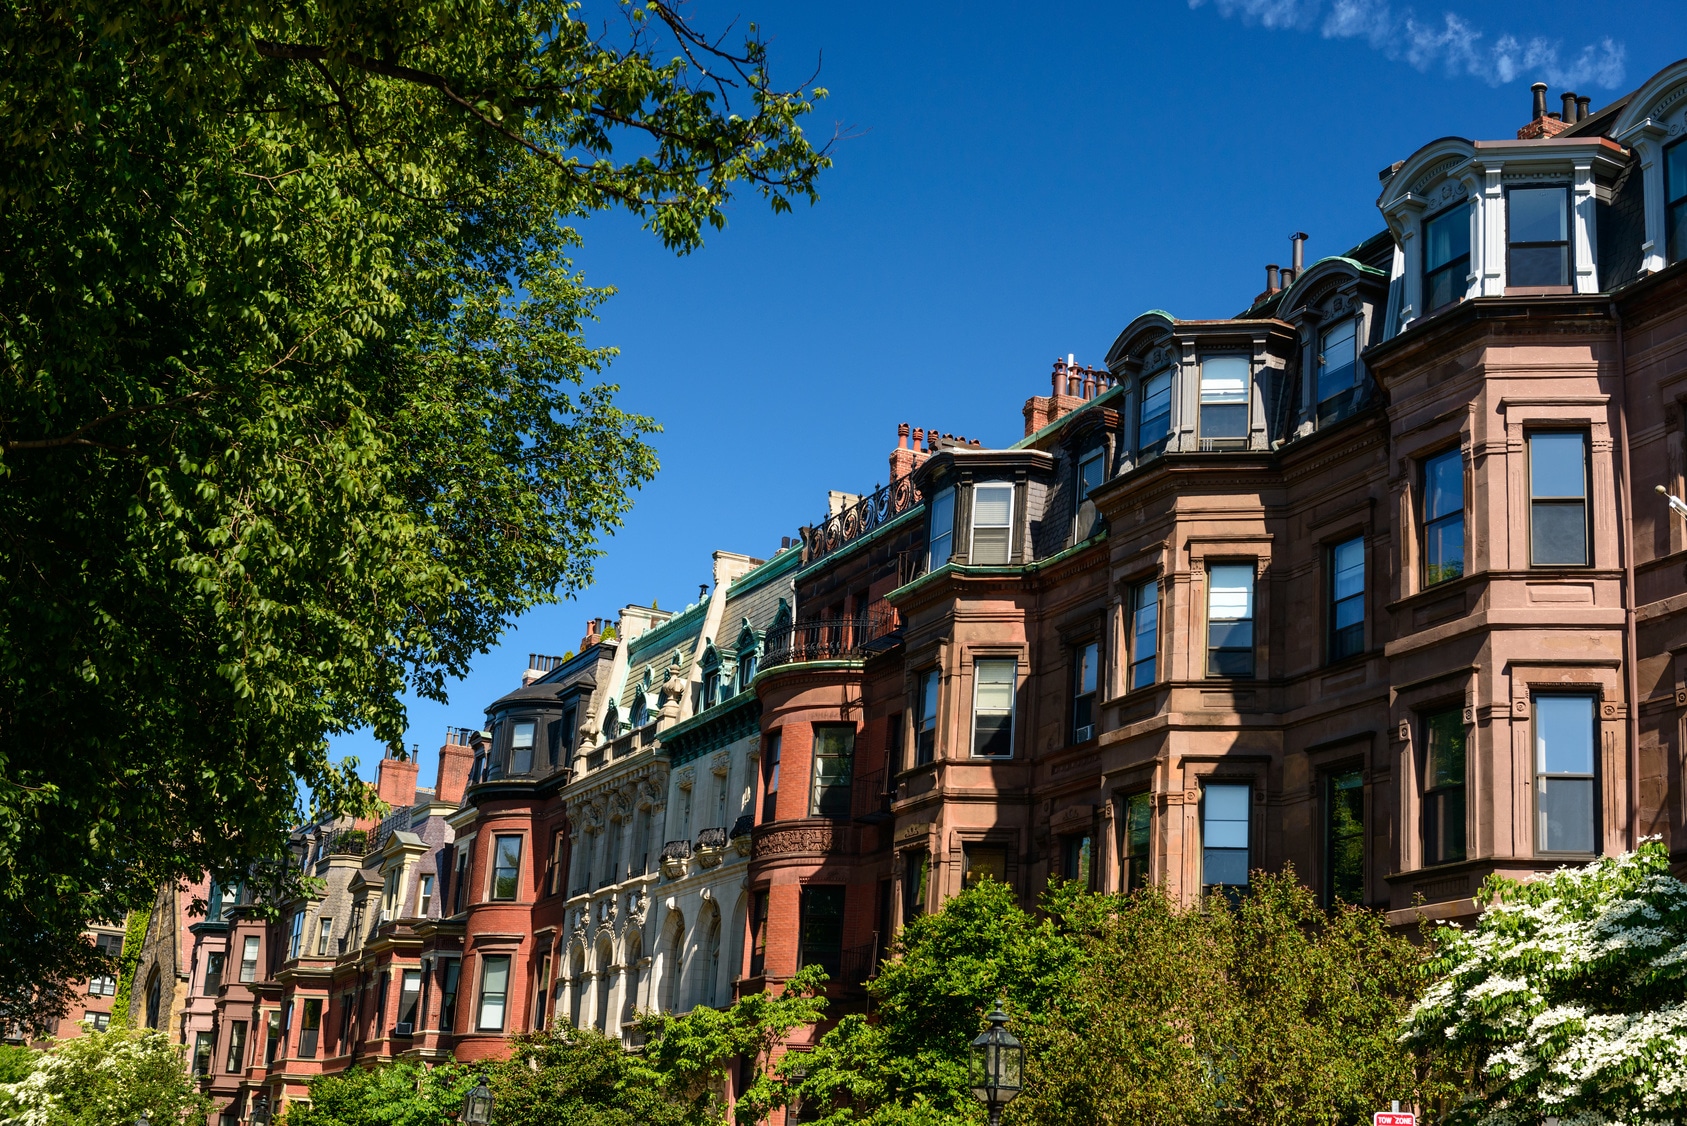 To Preserve and Protect Boston’s Historic Districts